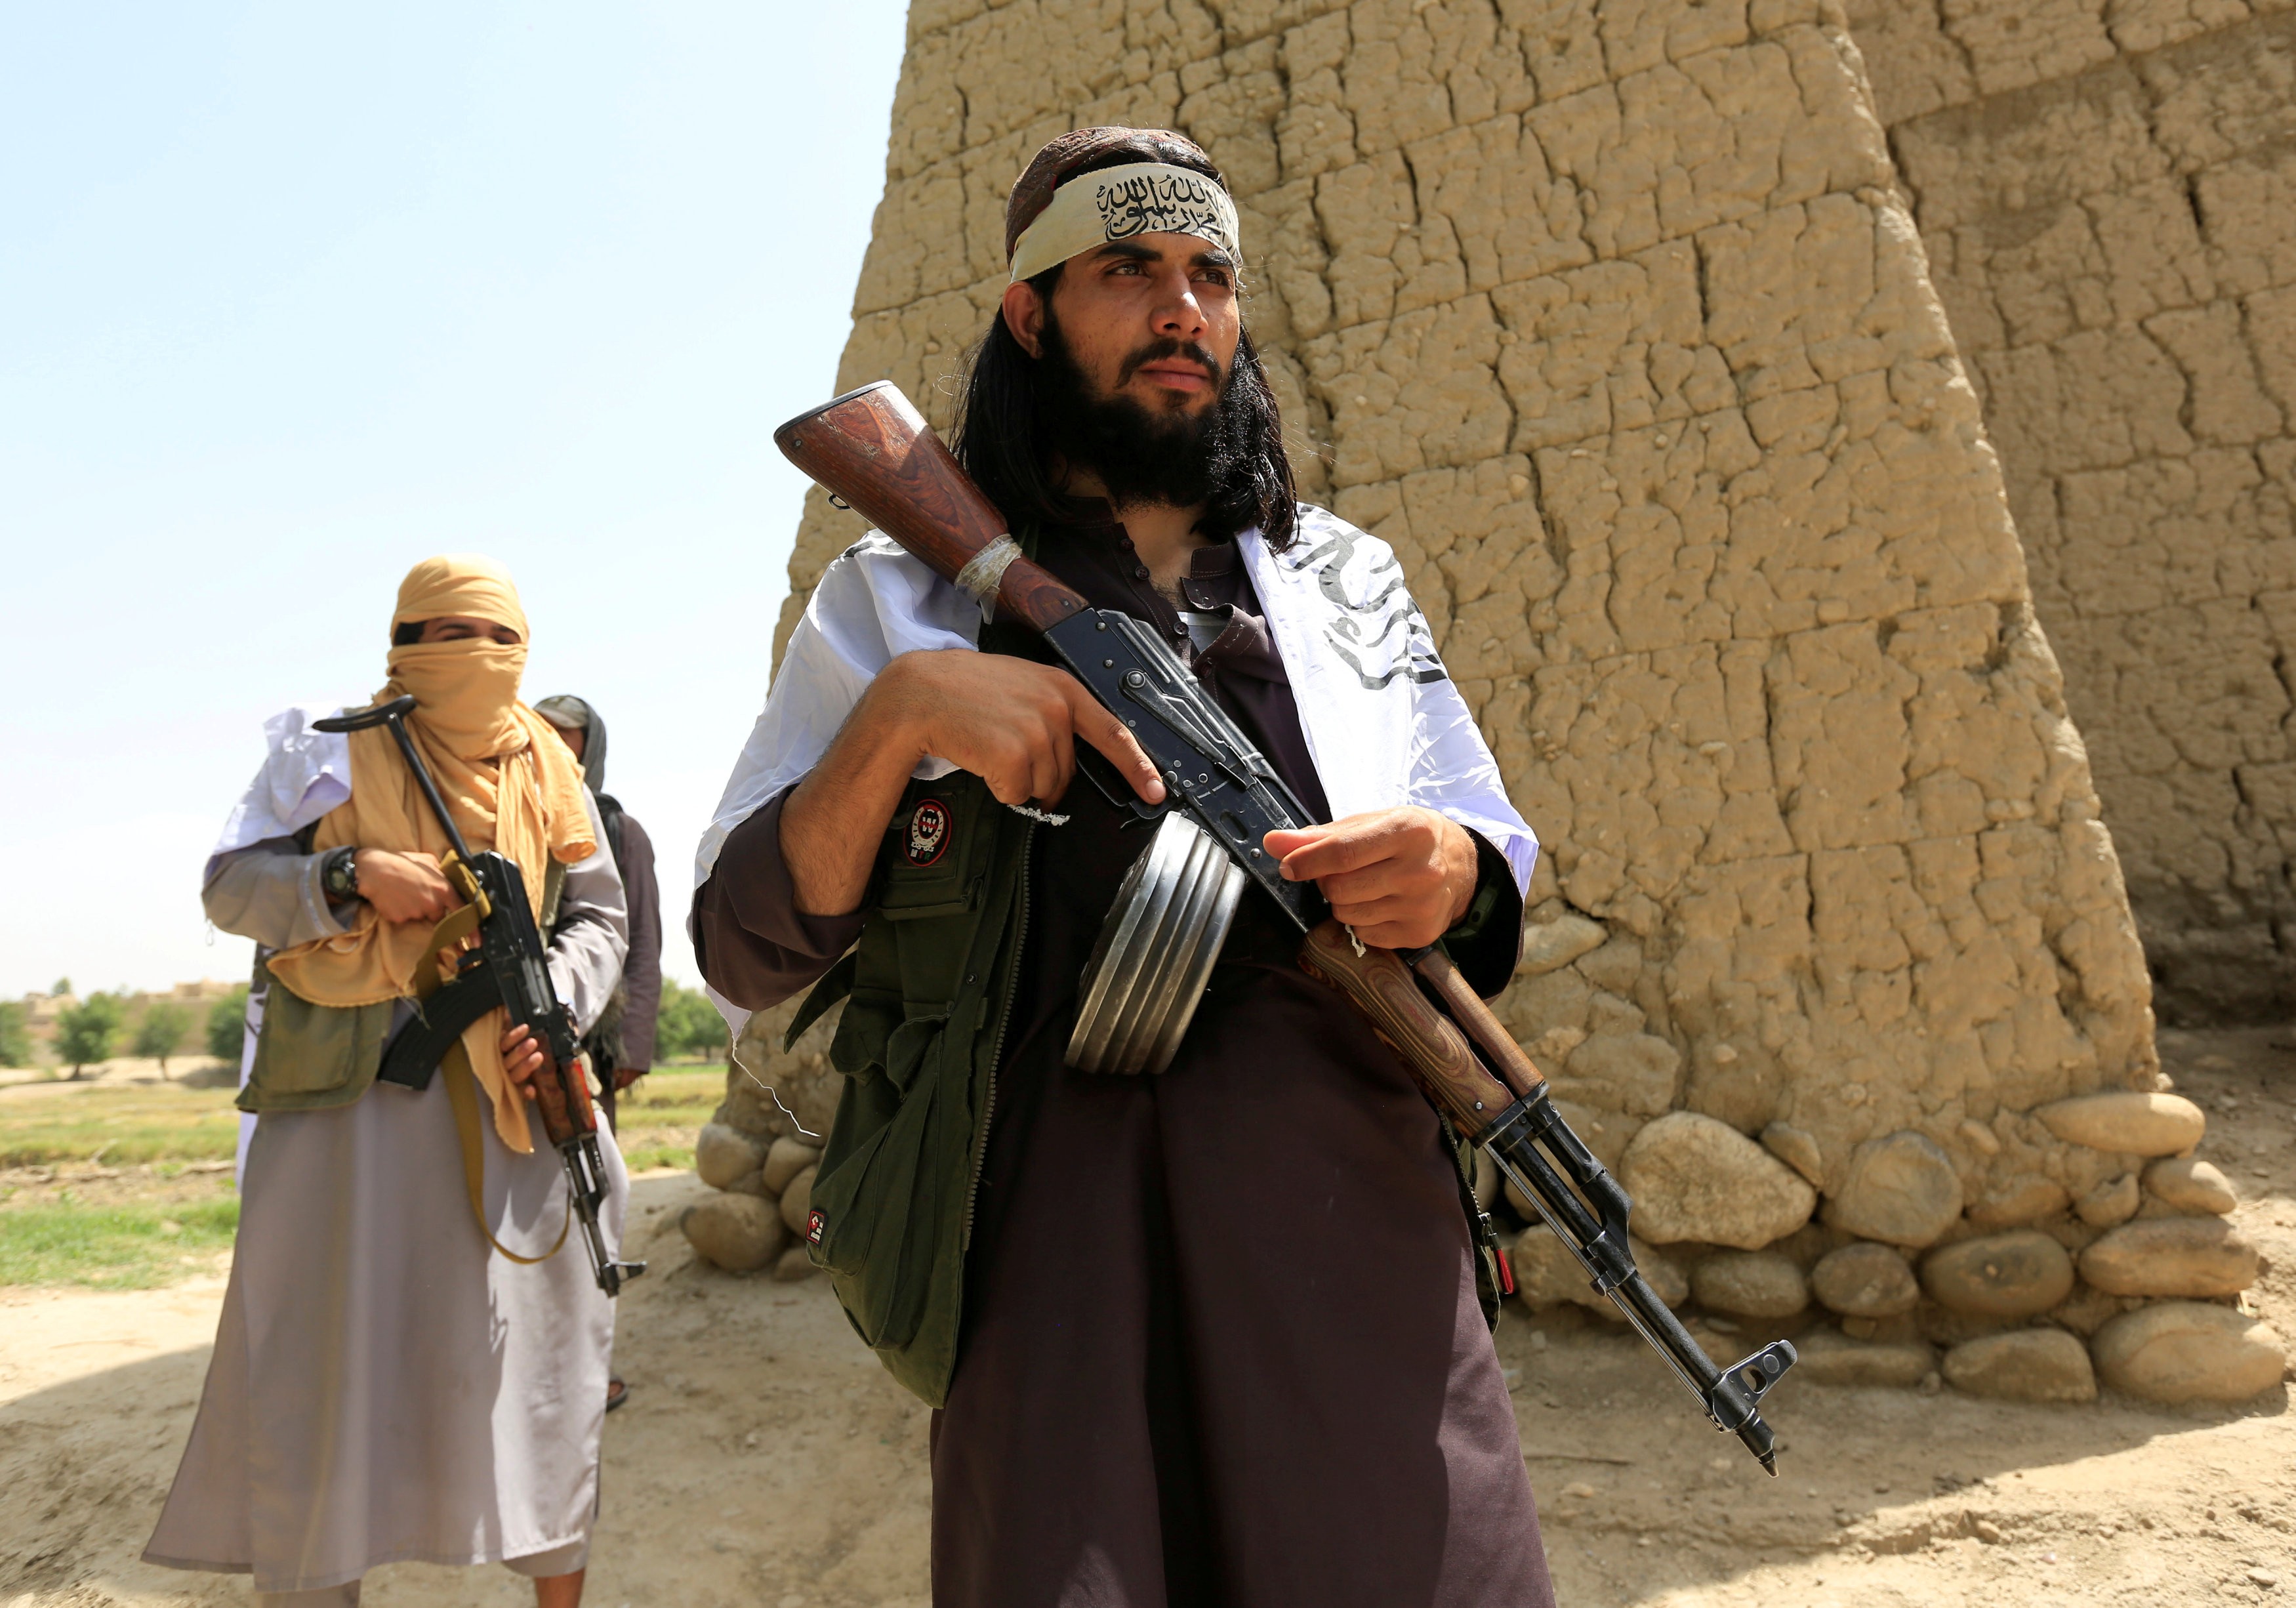 Taliban fighters pictured after a ceasefire on June 16 in Nangarhar province’s Ghanikhel district, Afghanistan. Photo: Reuters